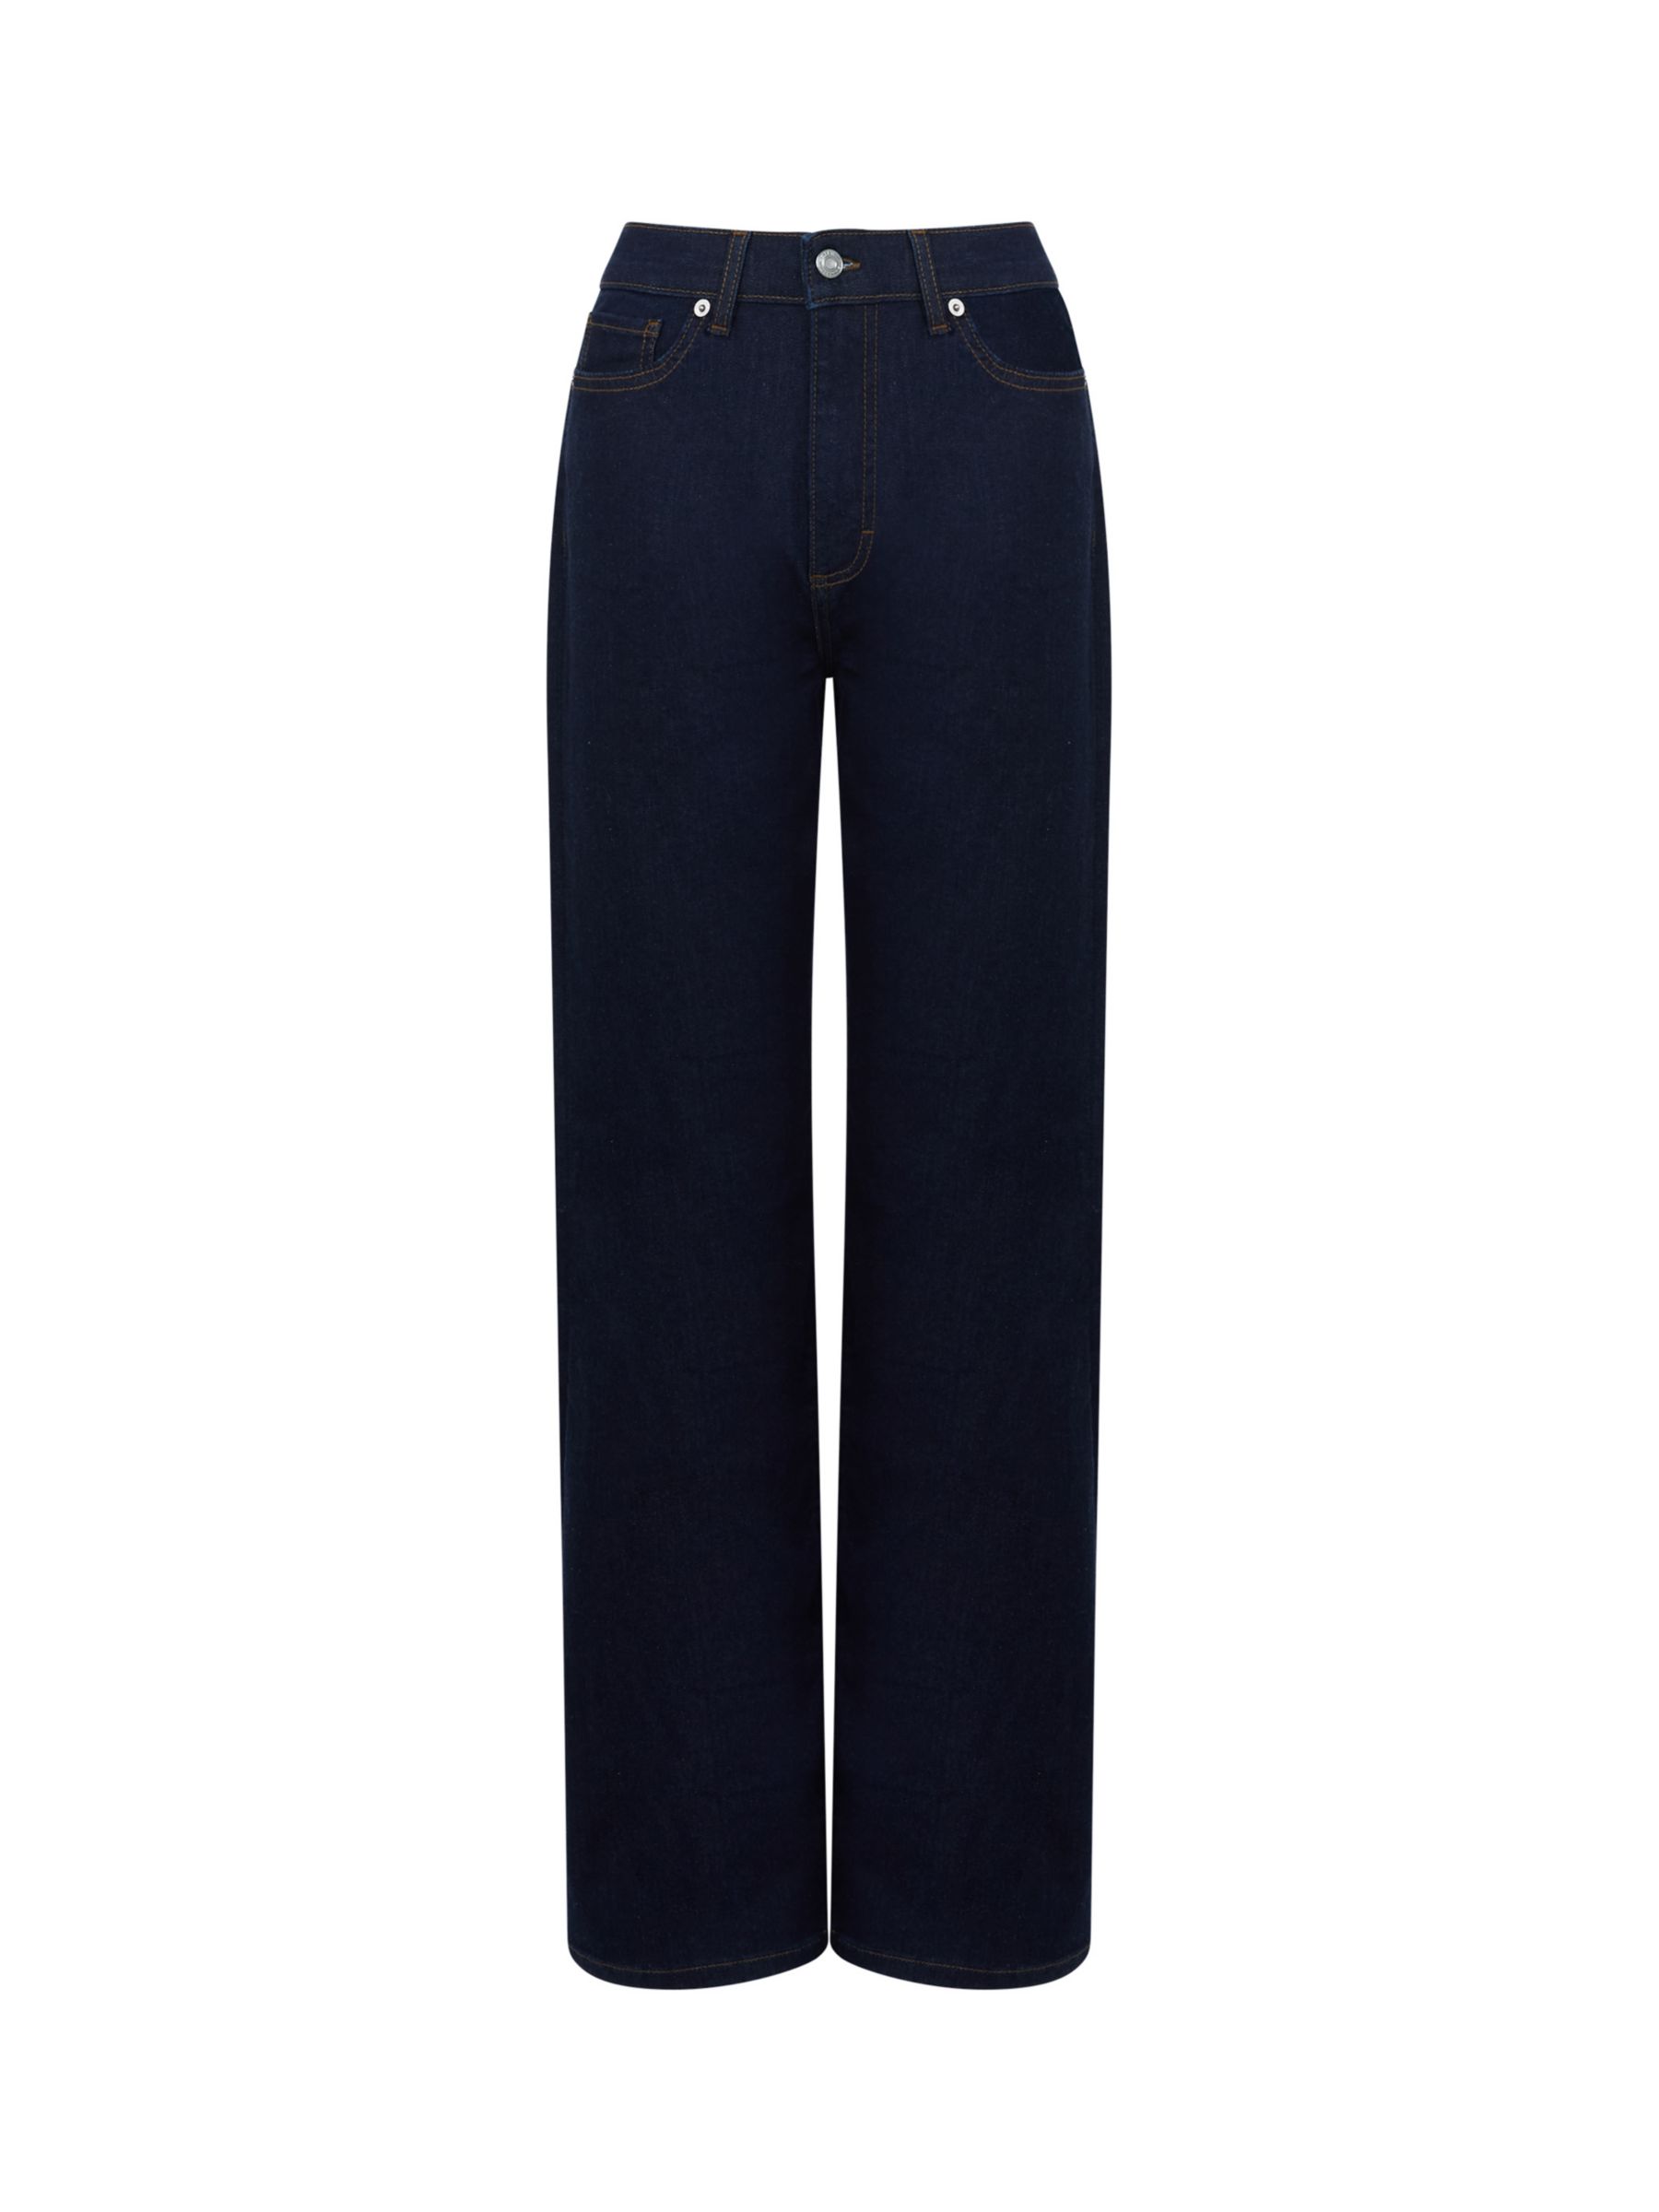 Extra High-Waisted Dark-Wash Wide-Leg Jeans for Women